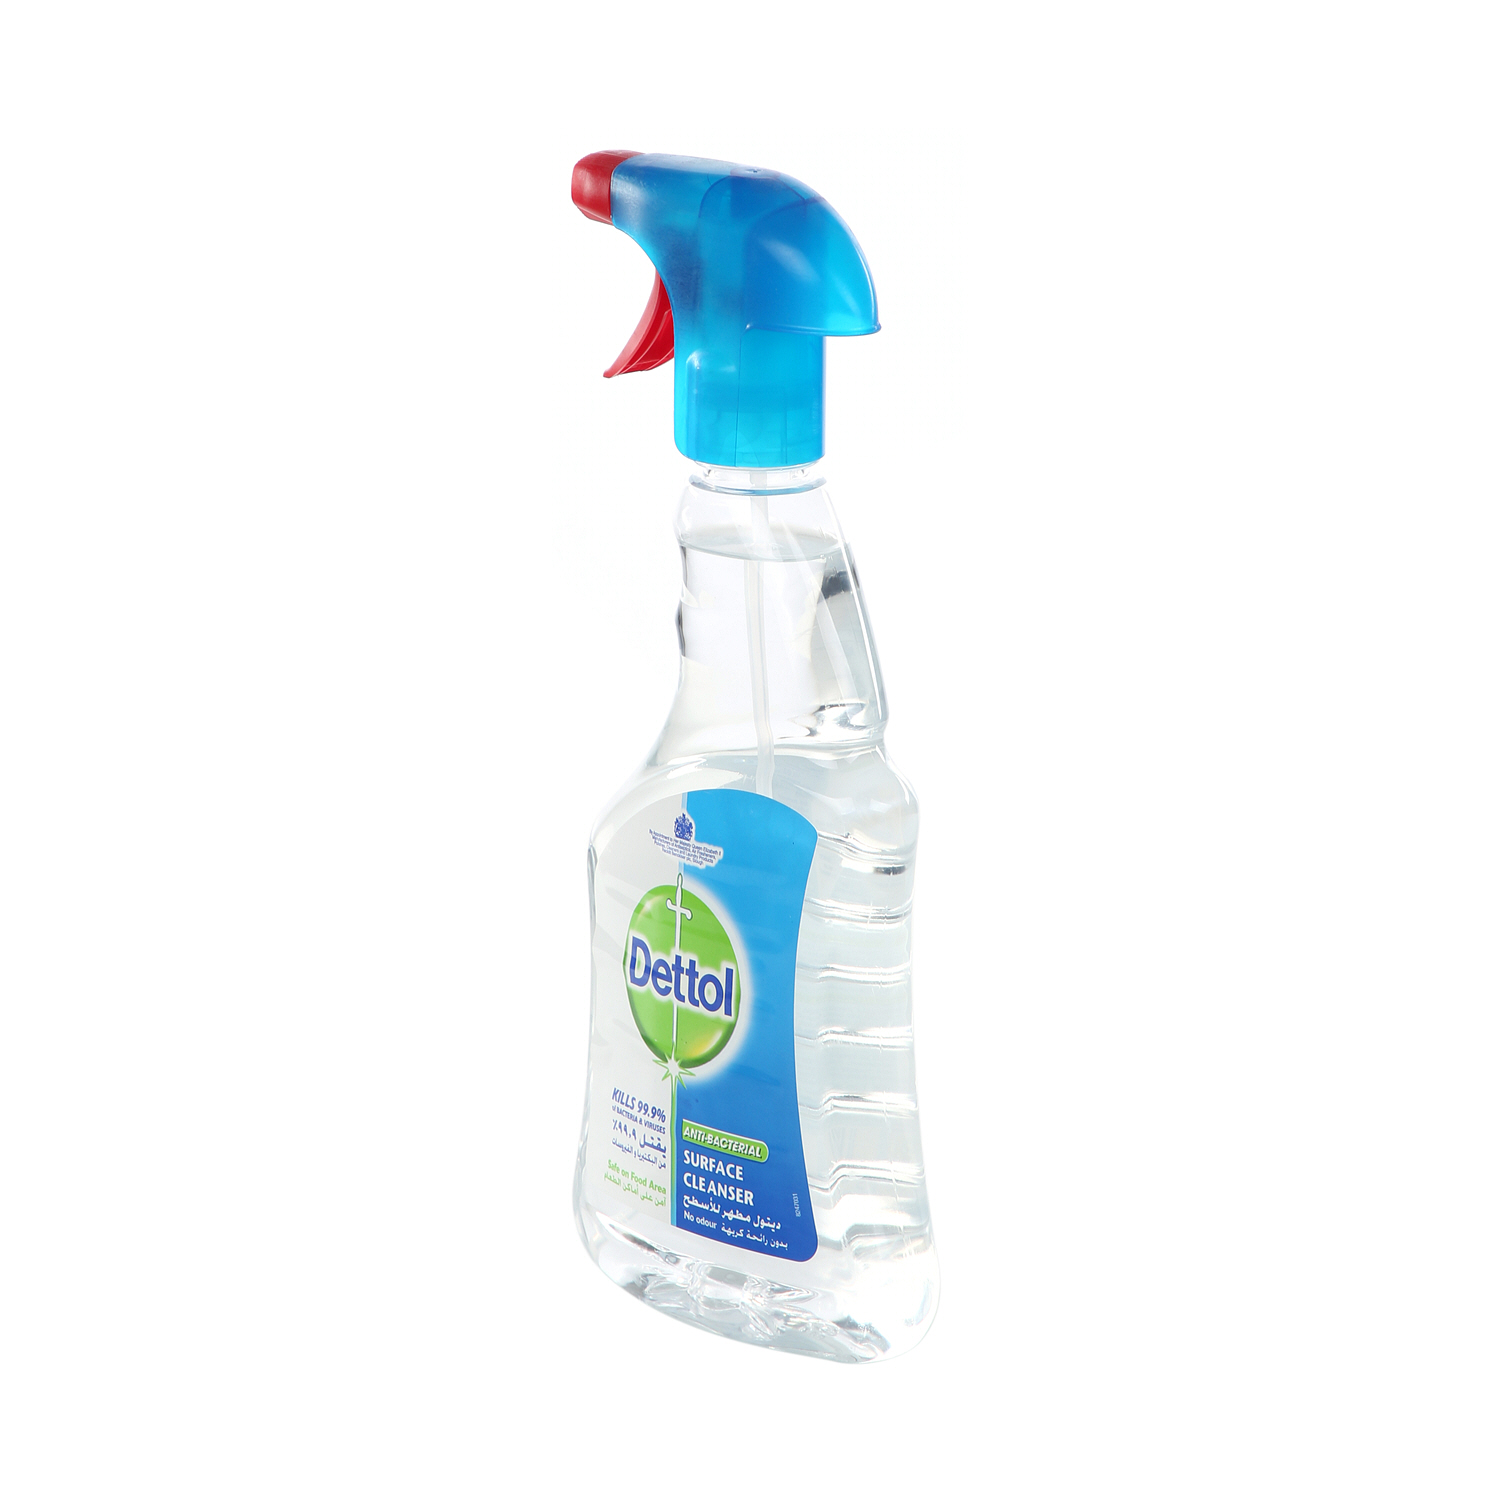 Dettol Antibacterial Surface Cleaner 500 ml